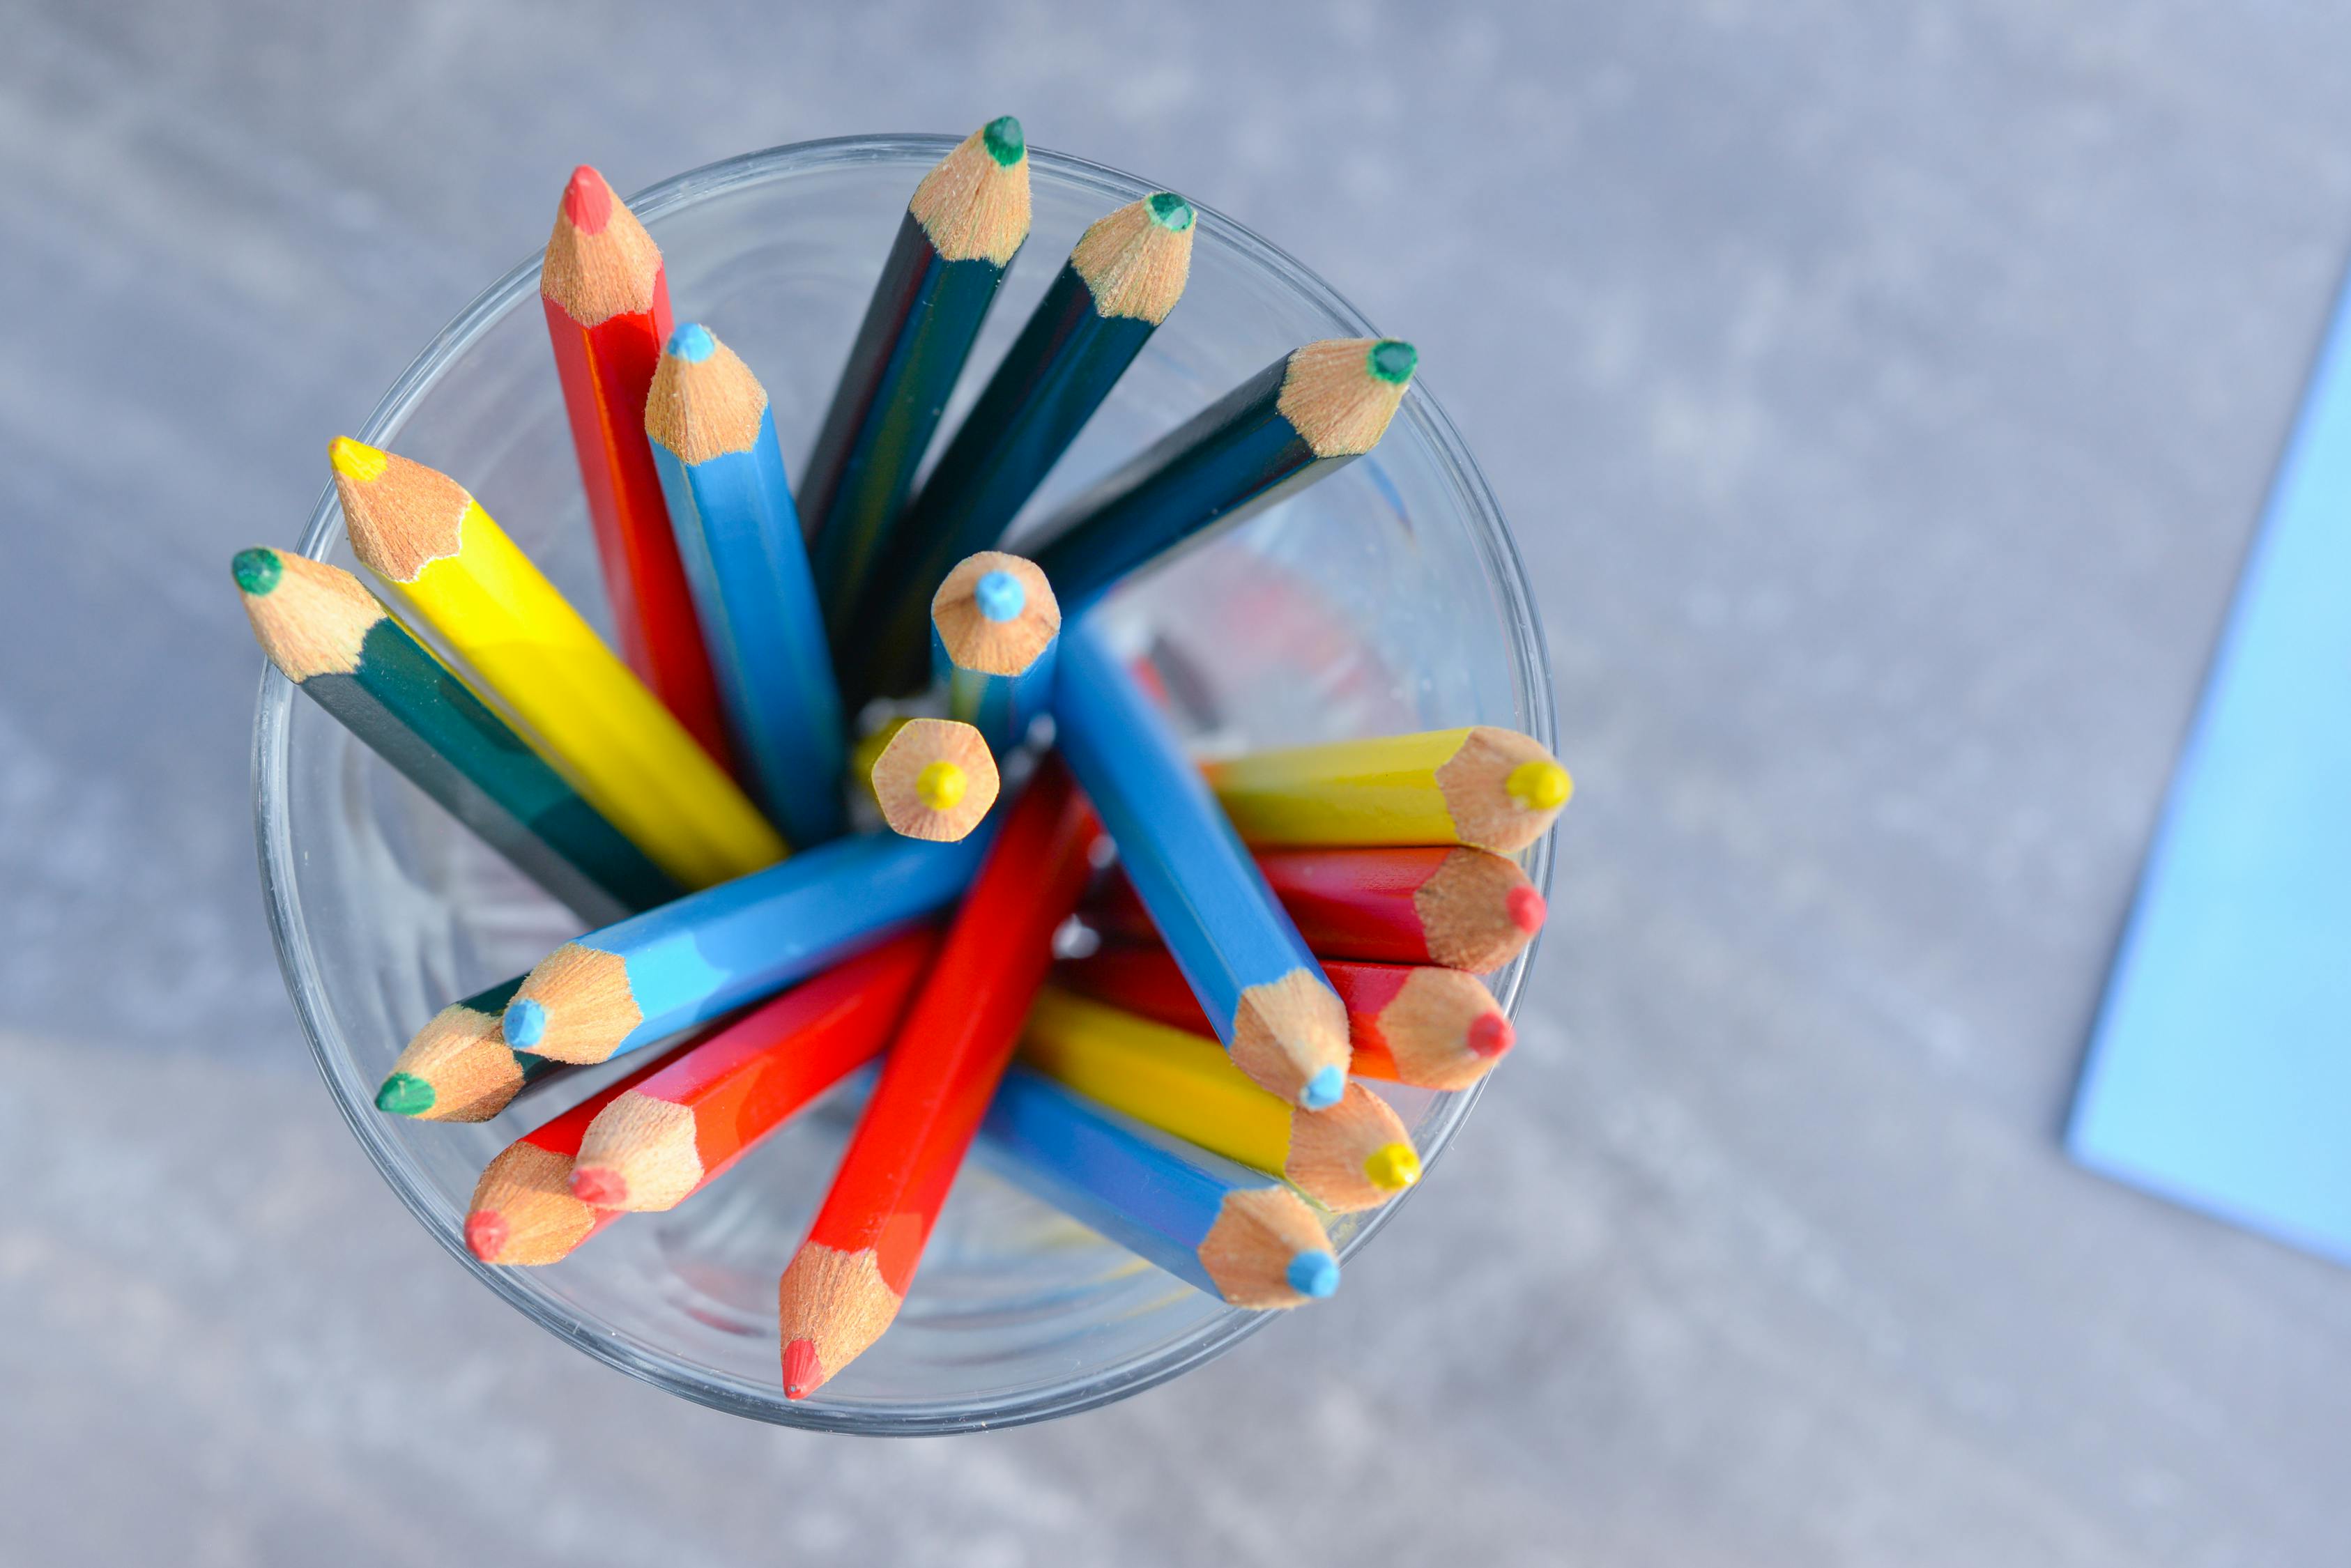 pencils-in-clear-glass-container-free-stock-photo